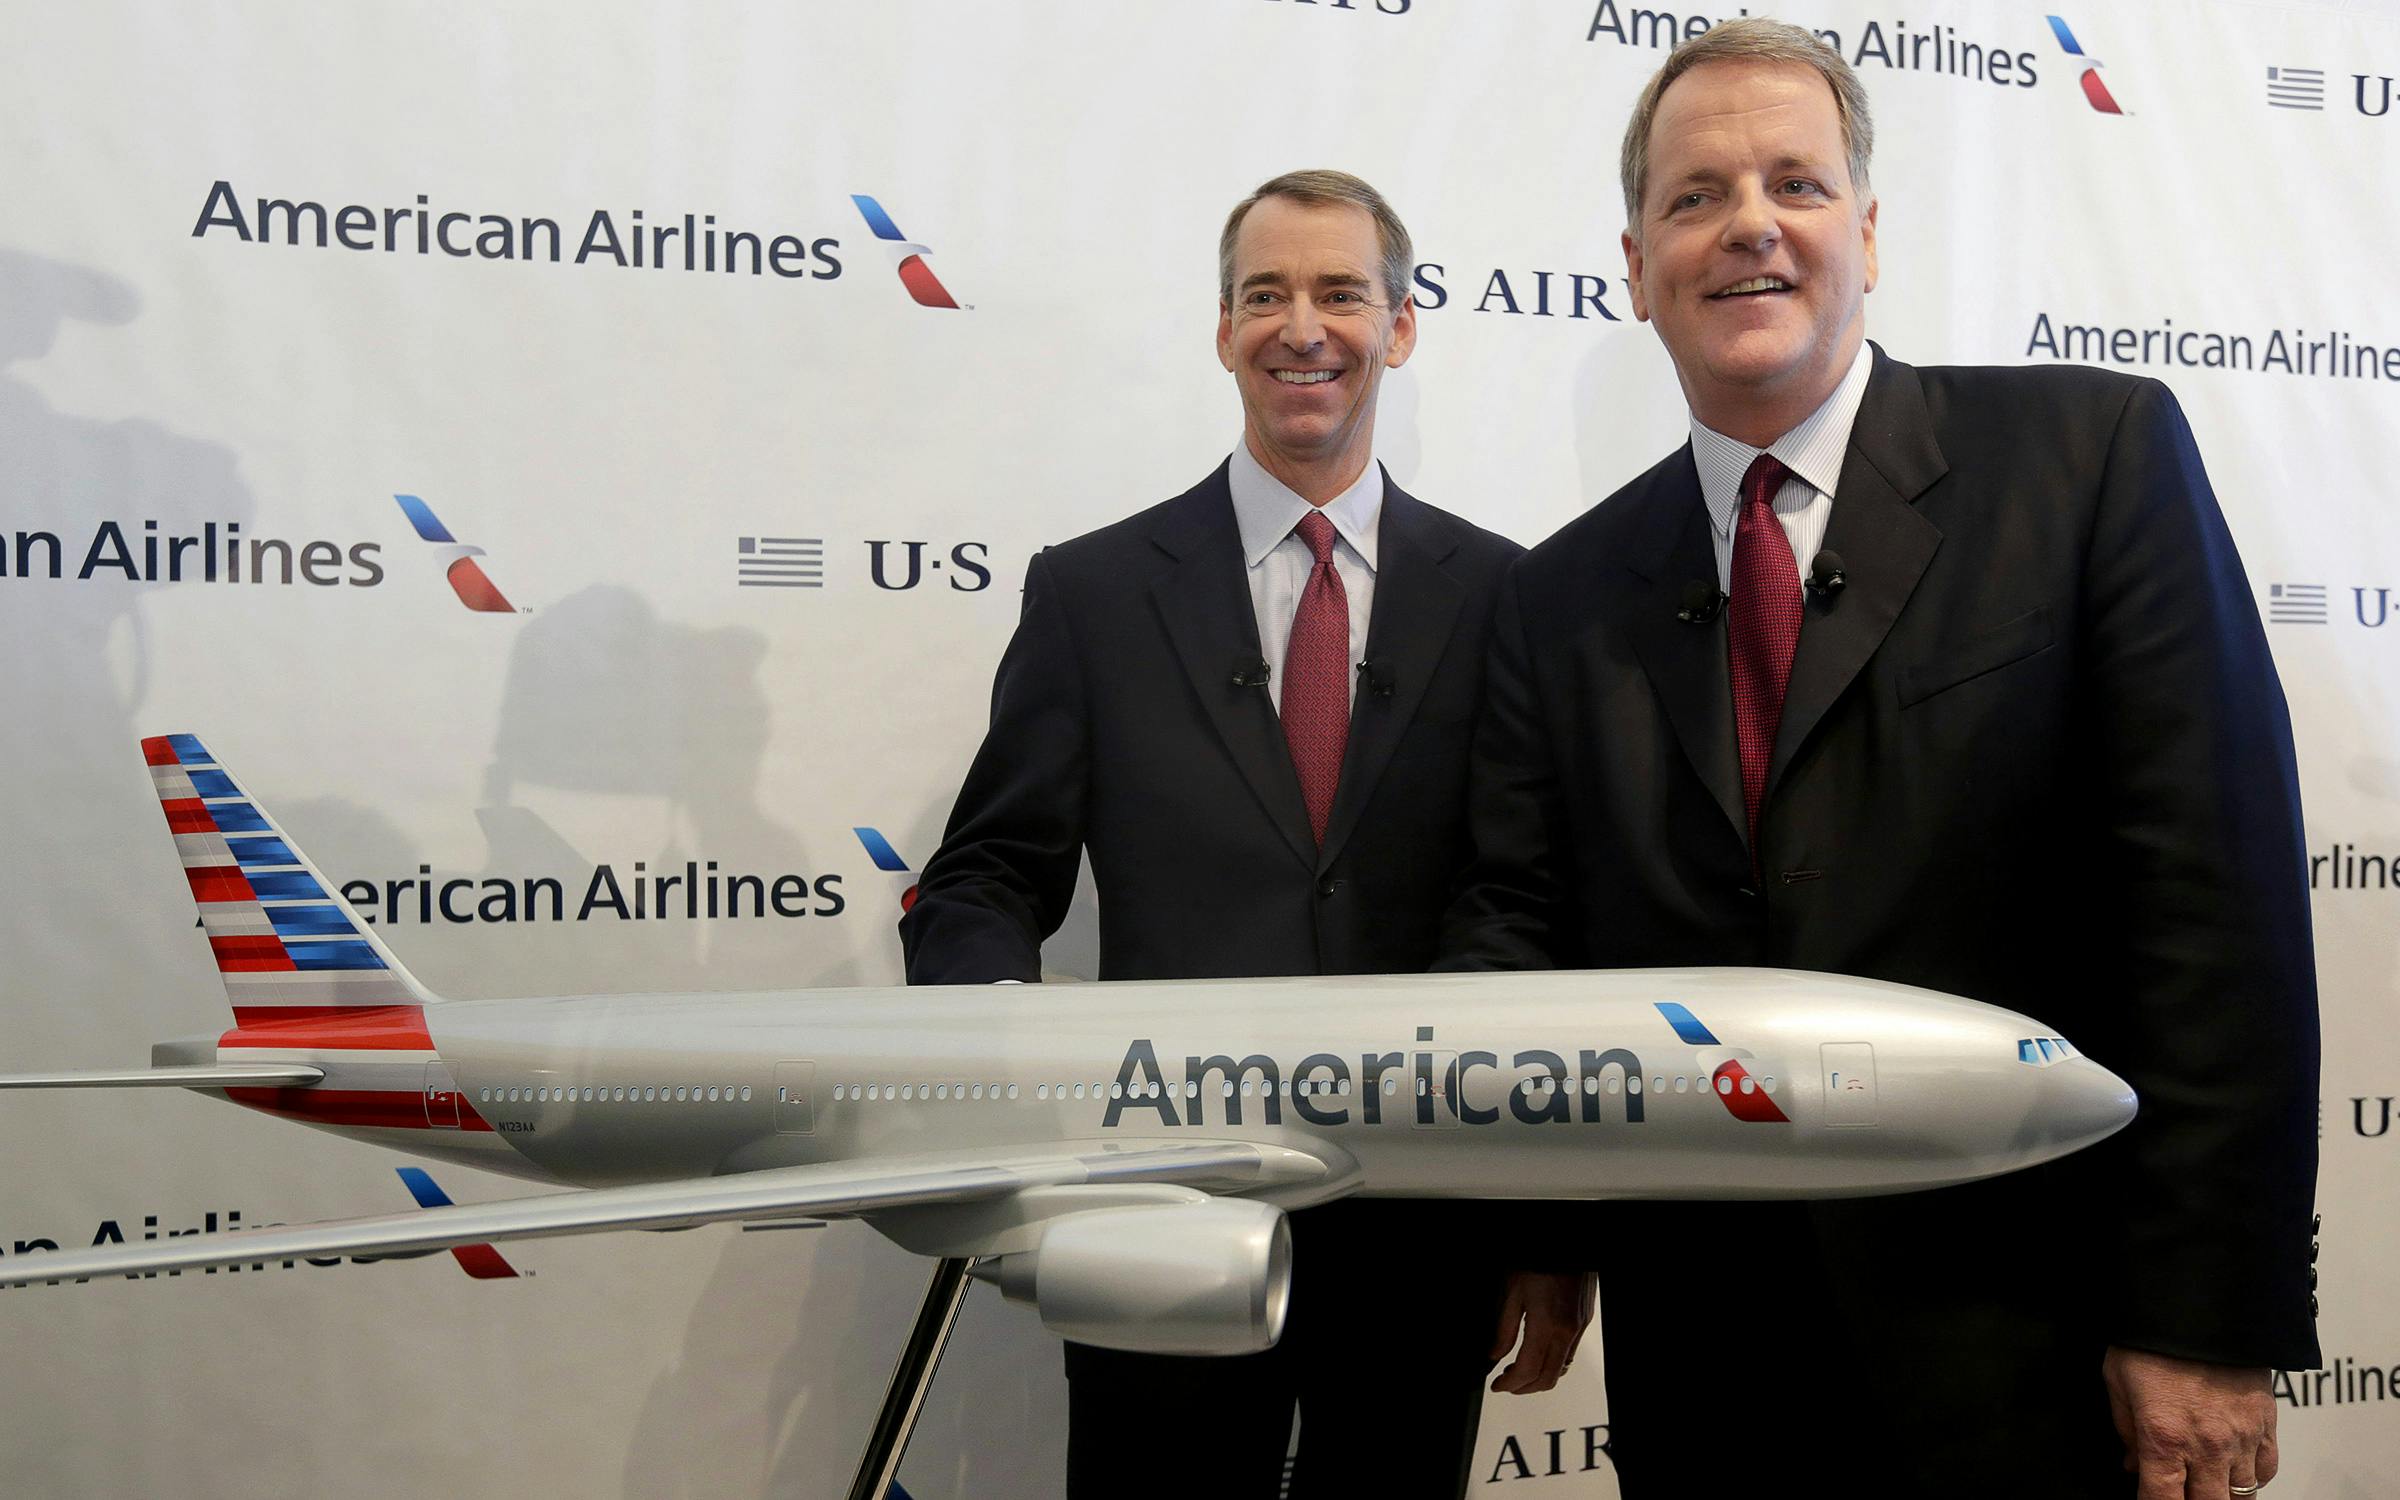 American Airlines spending $90 million to put name on plaza